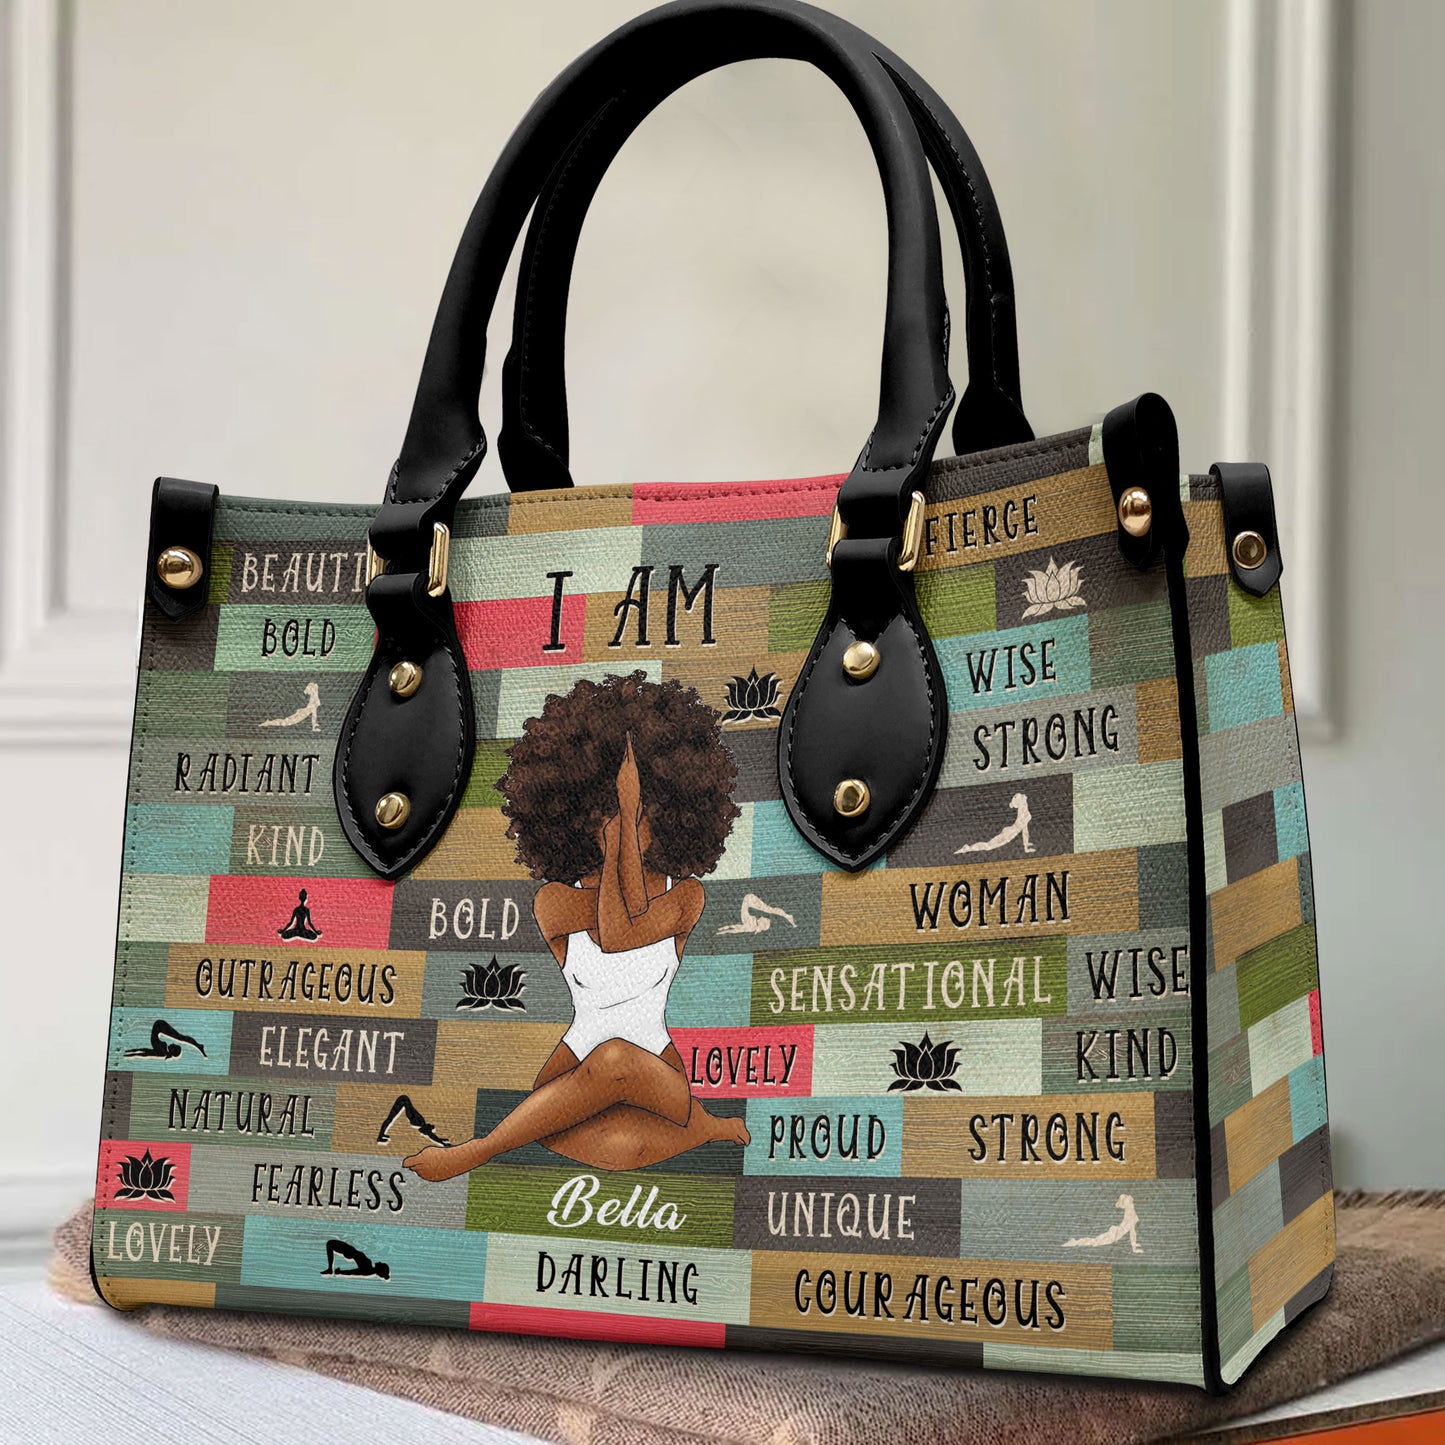 I Am Woman - Personalized Leather Bag